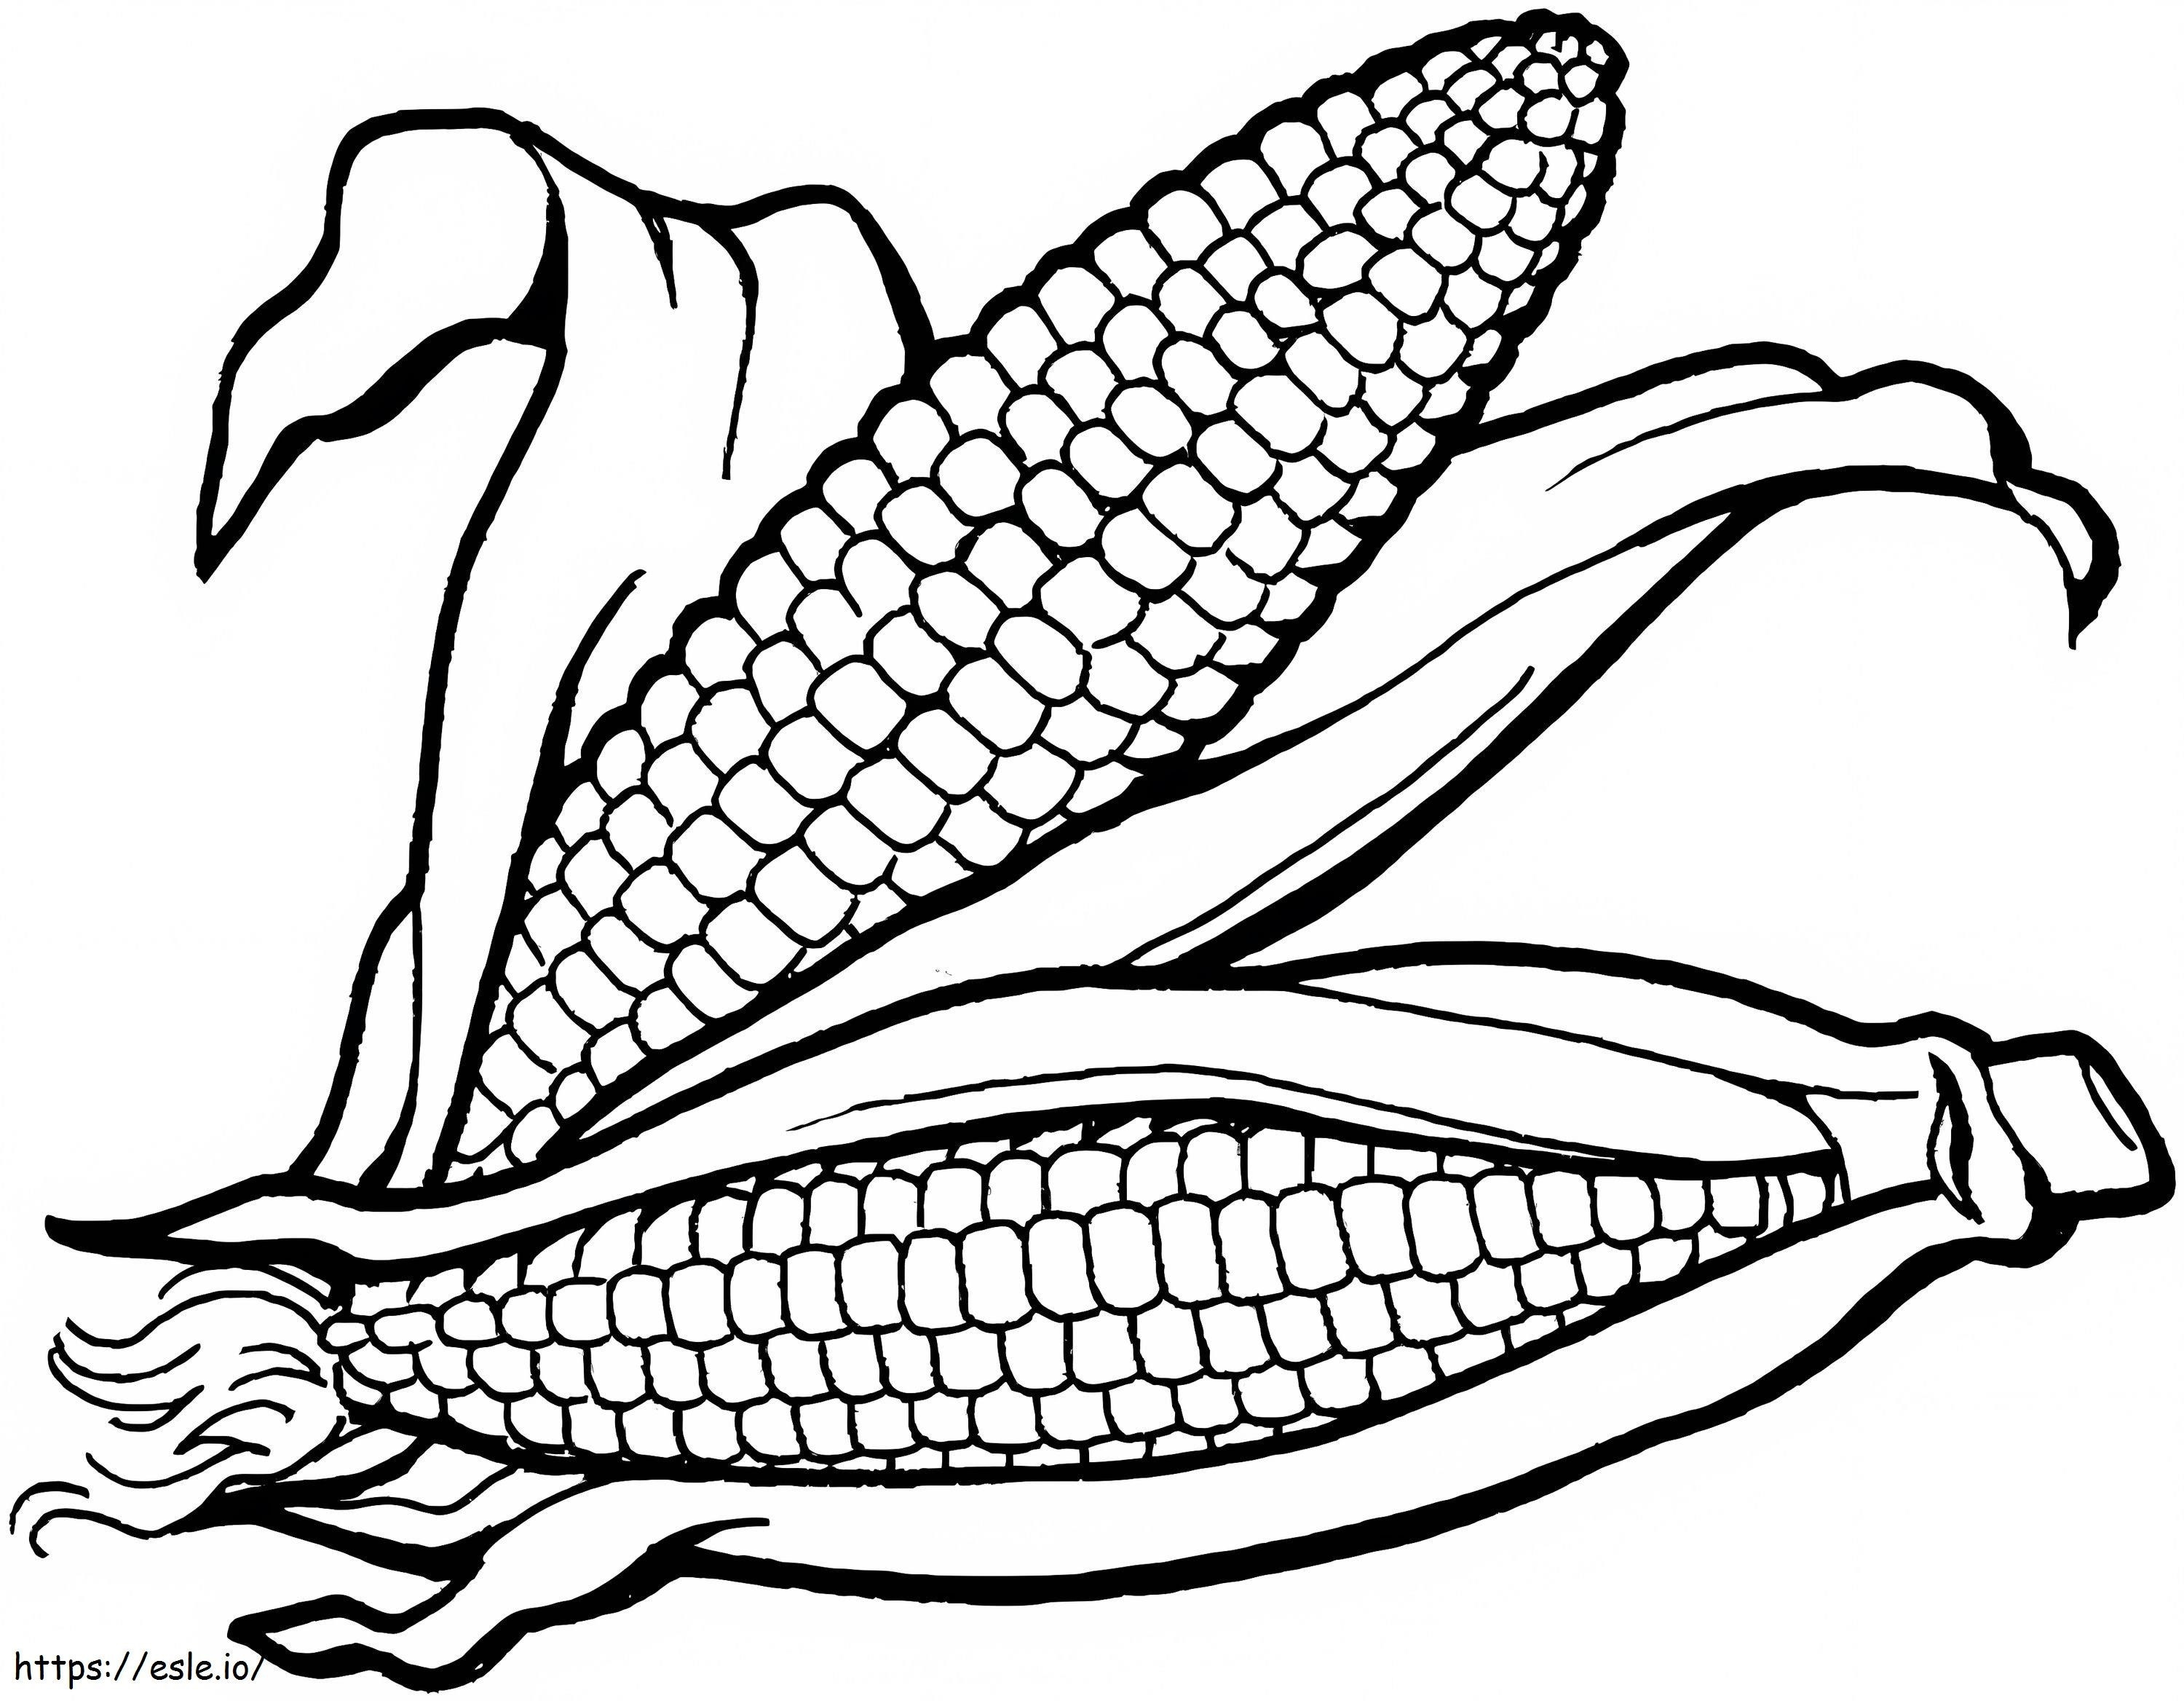 Two Indian Corns coloring page